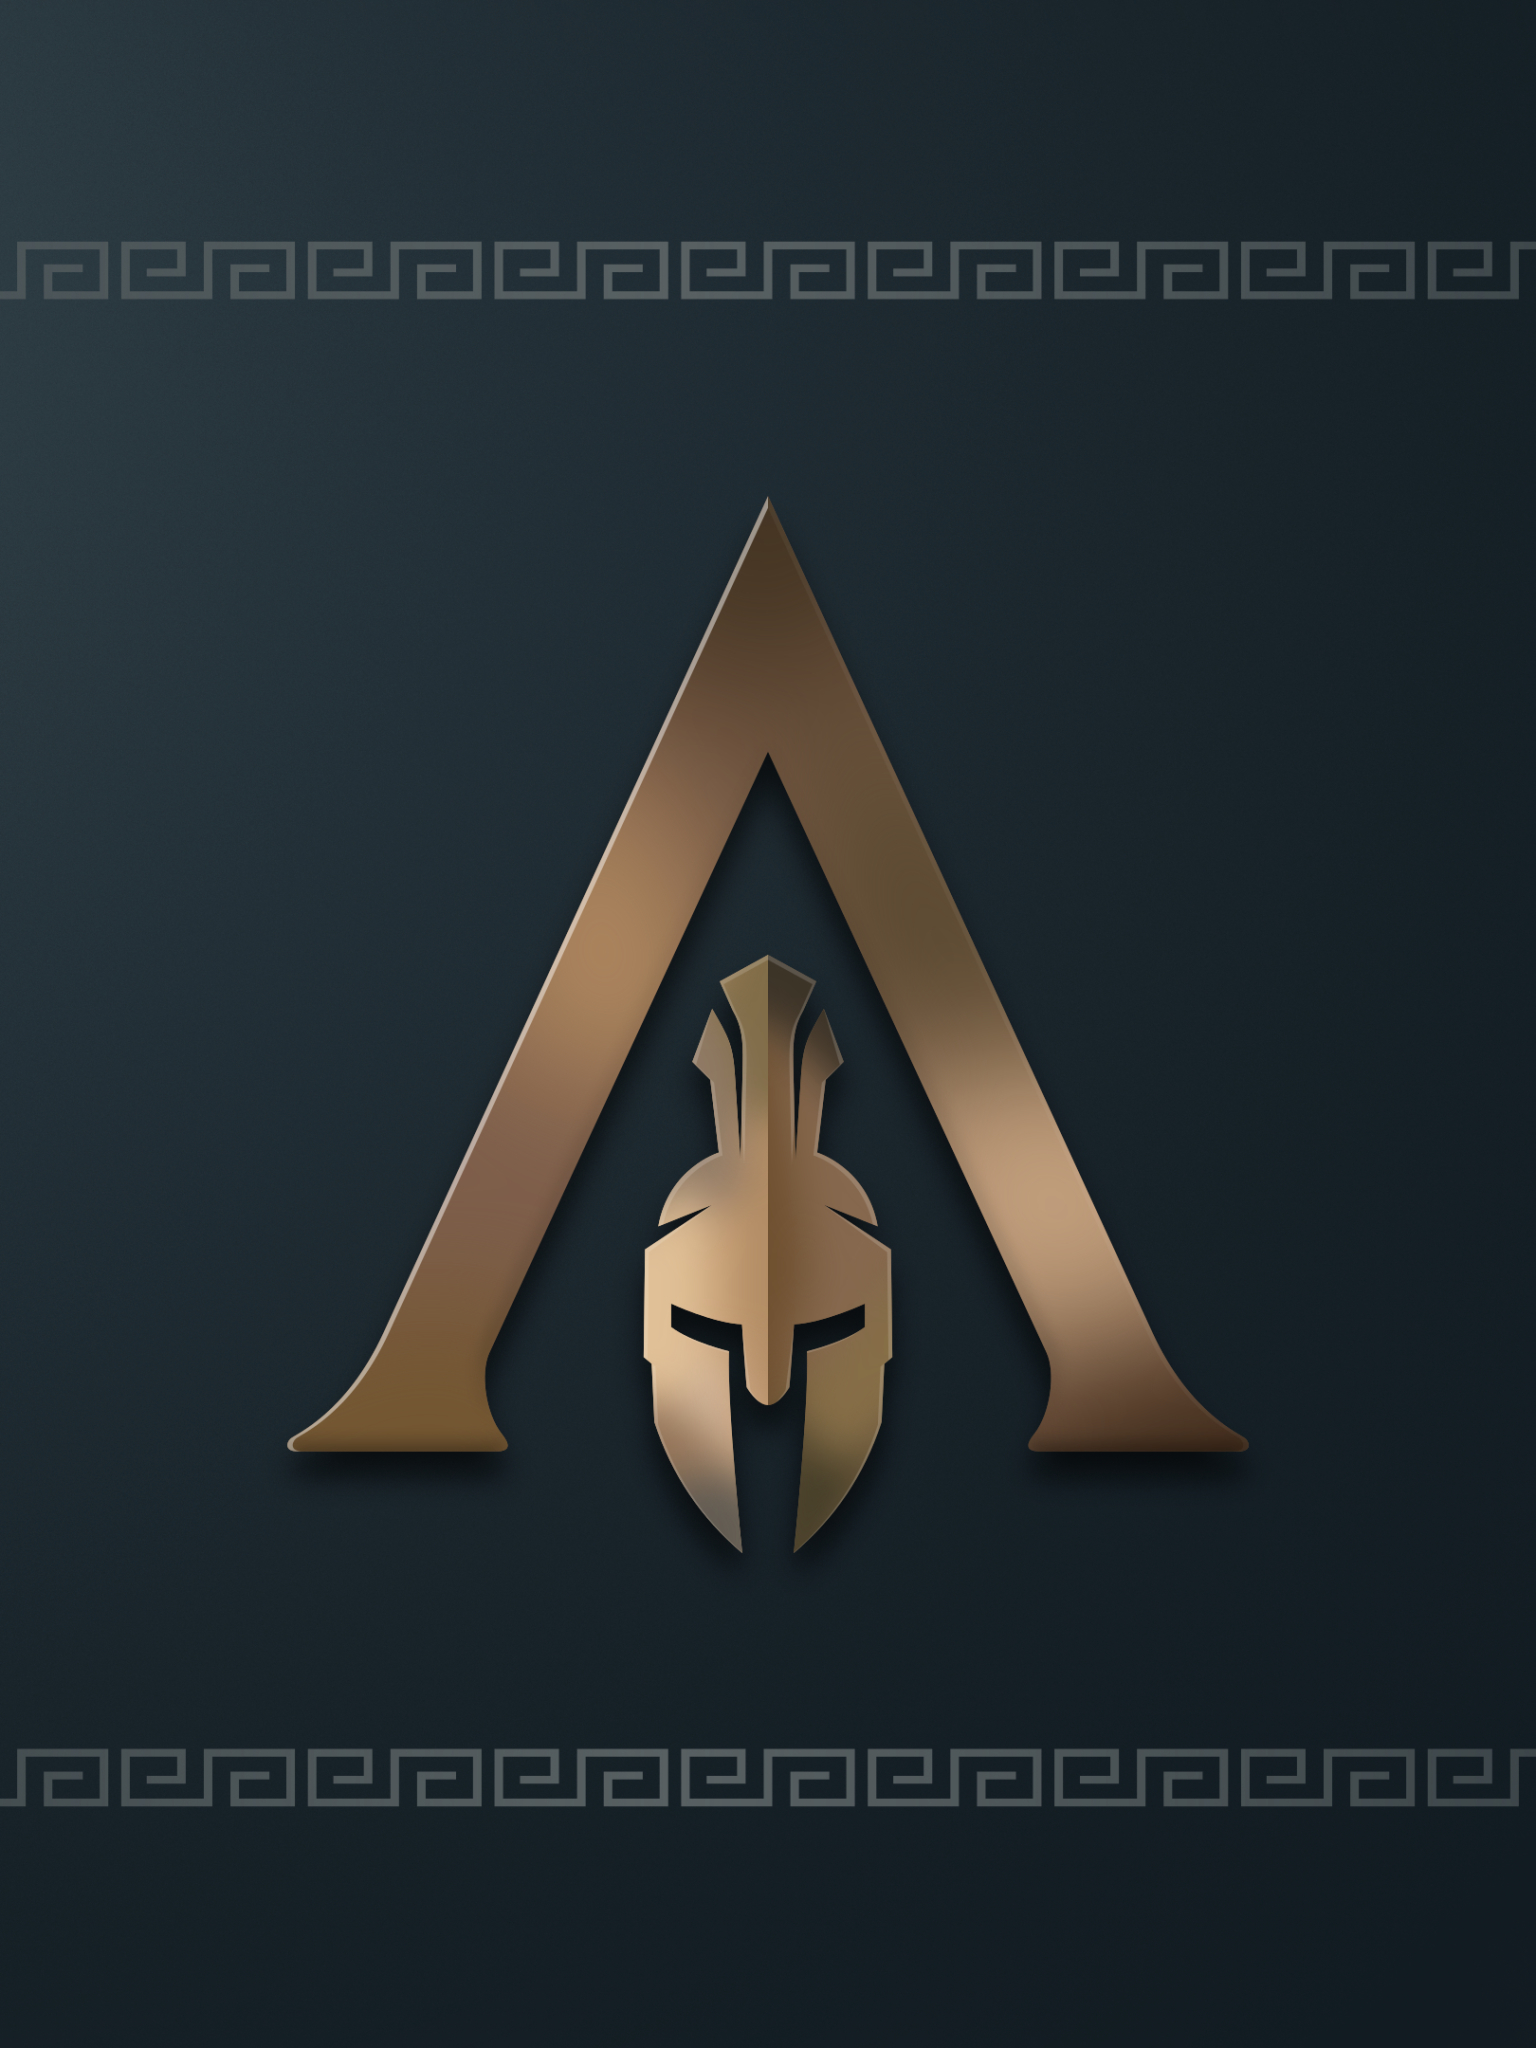 assassin's creed odyssey, video game, assassin's creed, spartan